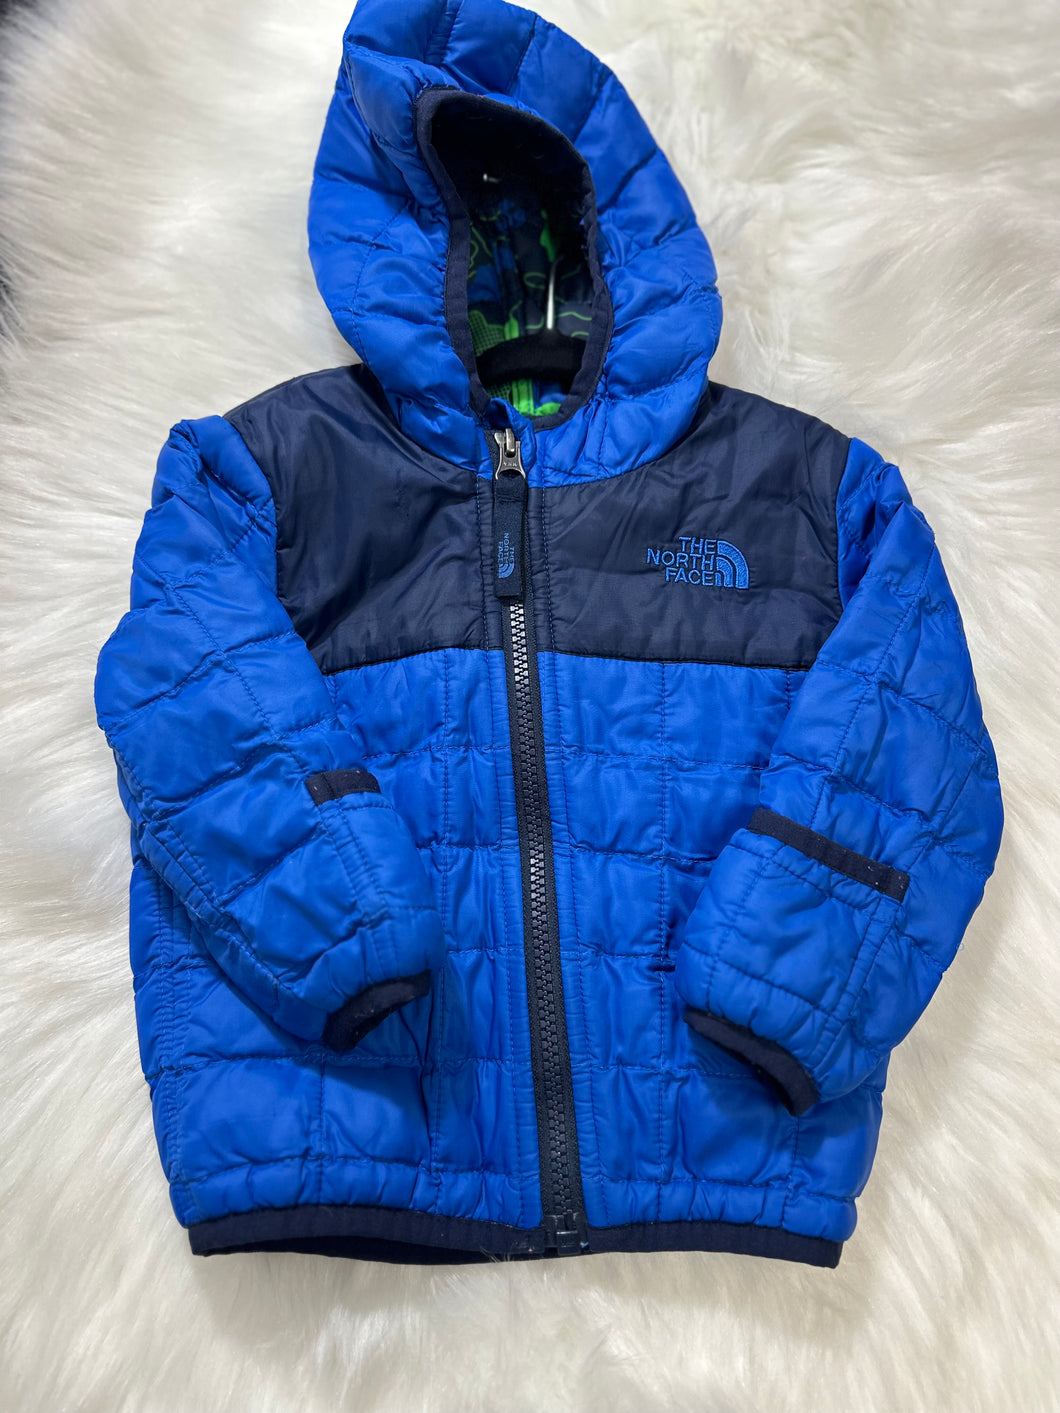 The North Face Jacket 6-12m